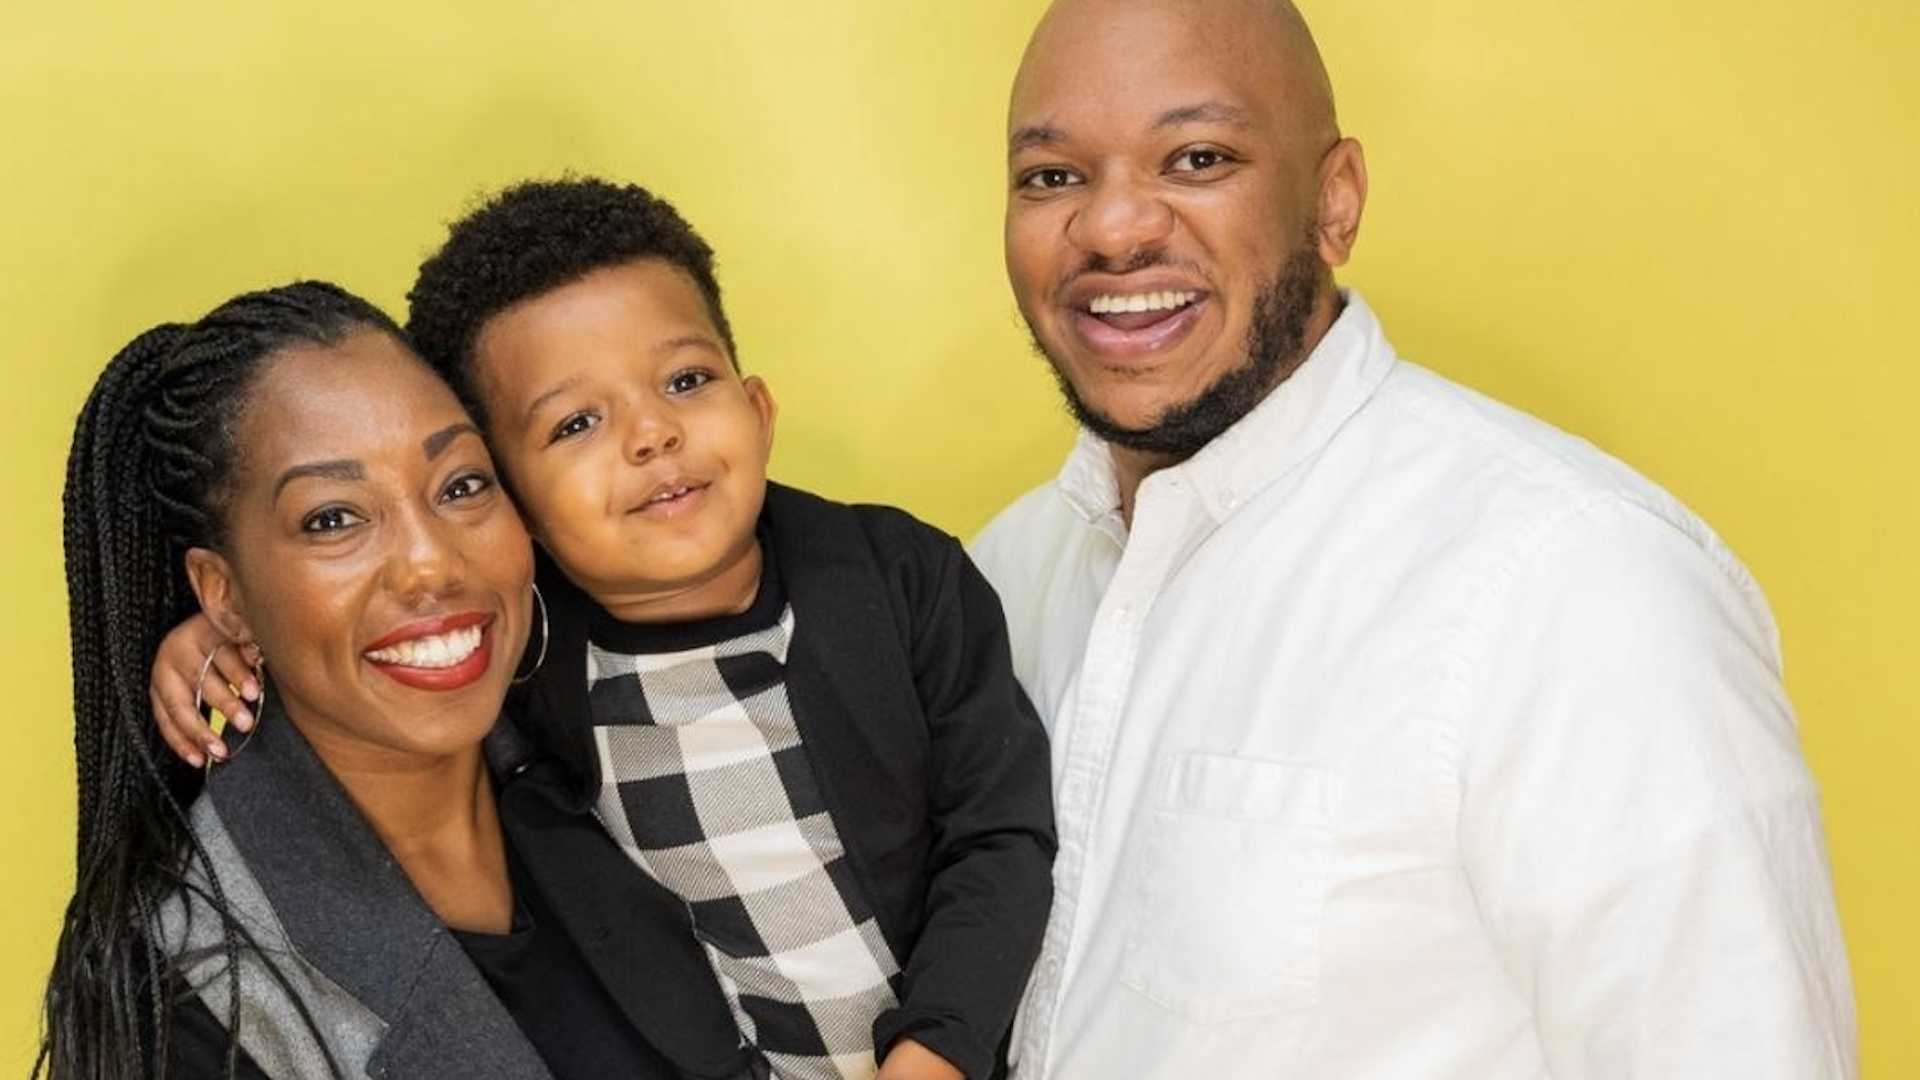 This Couple Shifted The Beauty Industry Landscape With Their Hair Product Line For Black Boys. Here's How They Did It